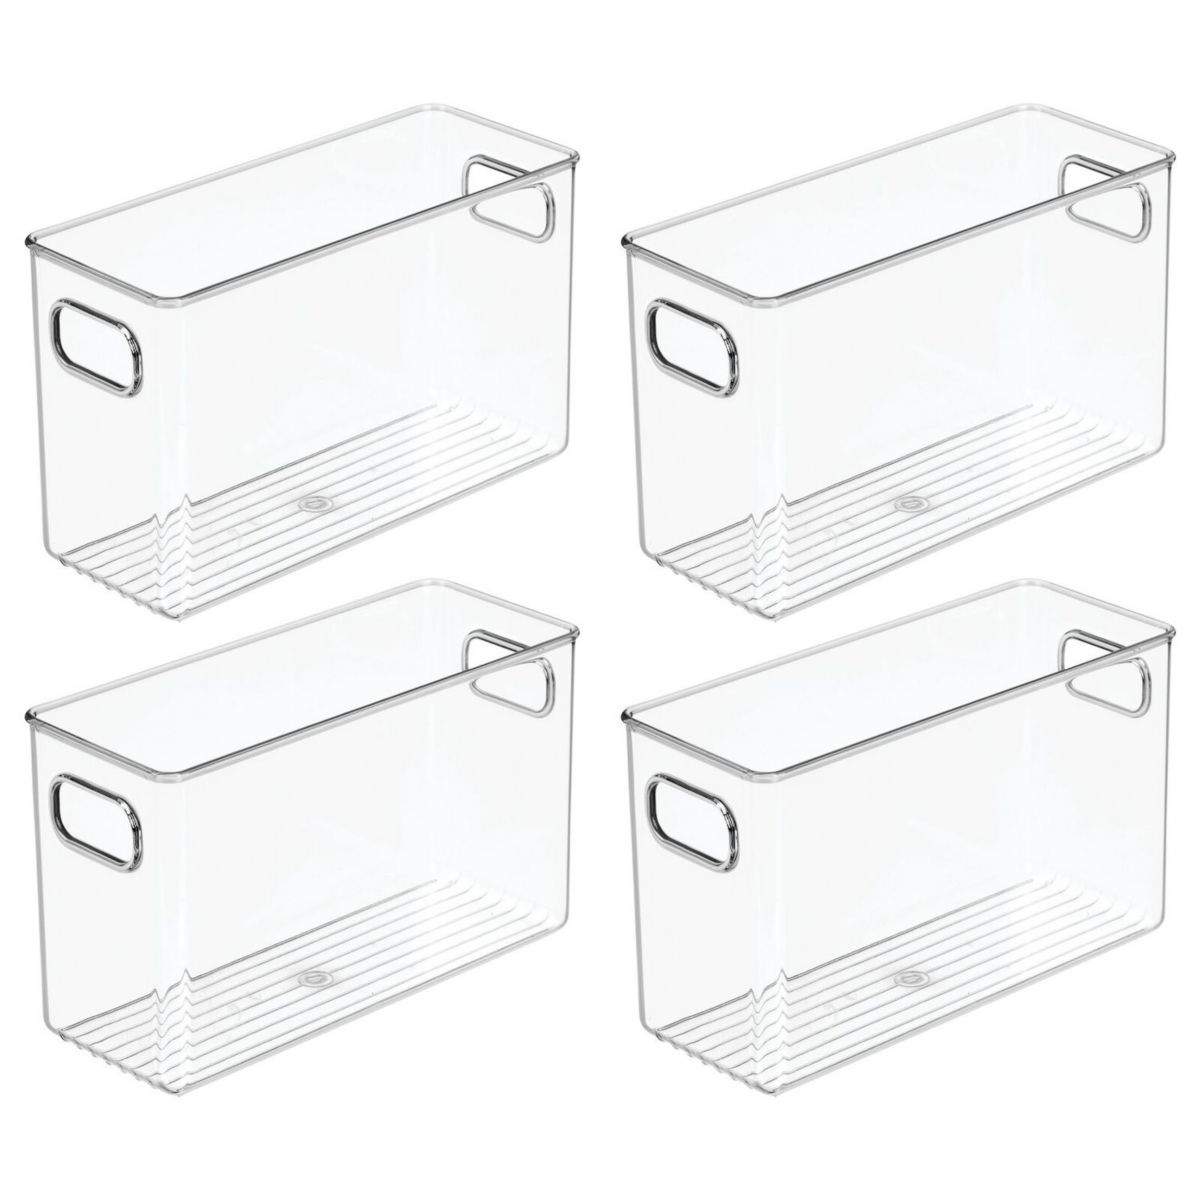 Mdesign Plastic Breast Milk Storage Container With Handles - 4 Pack MDesign